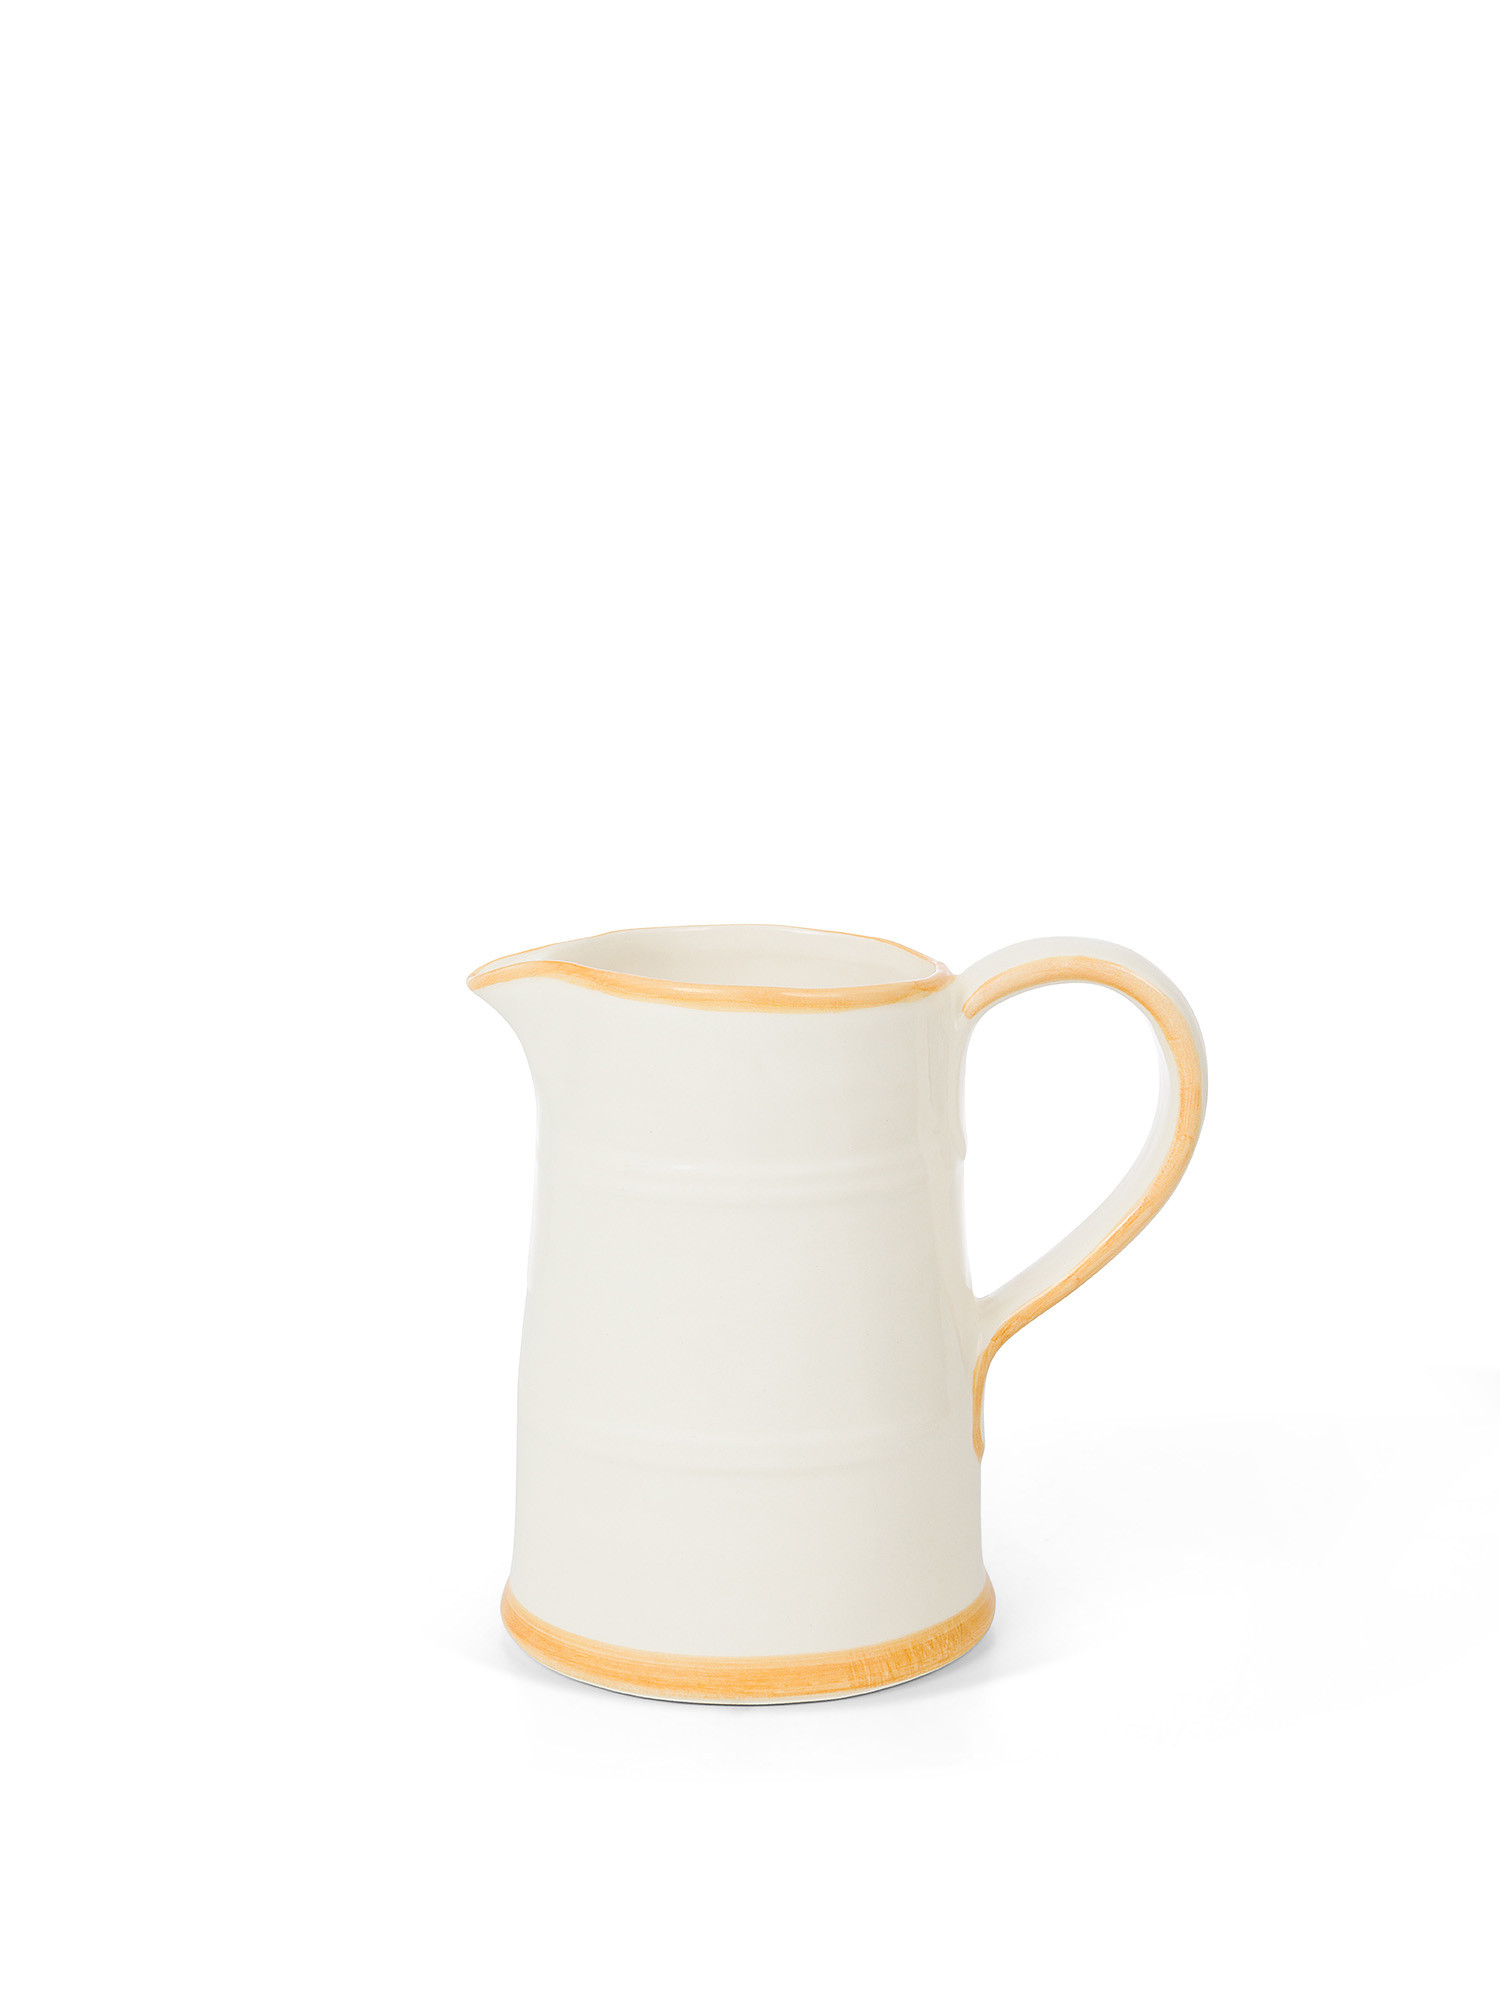 Ceramic jug with colored edge, White, large image number 0